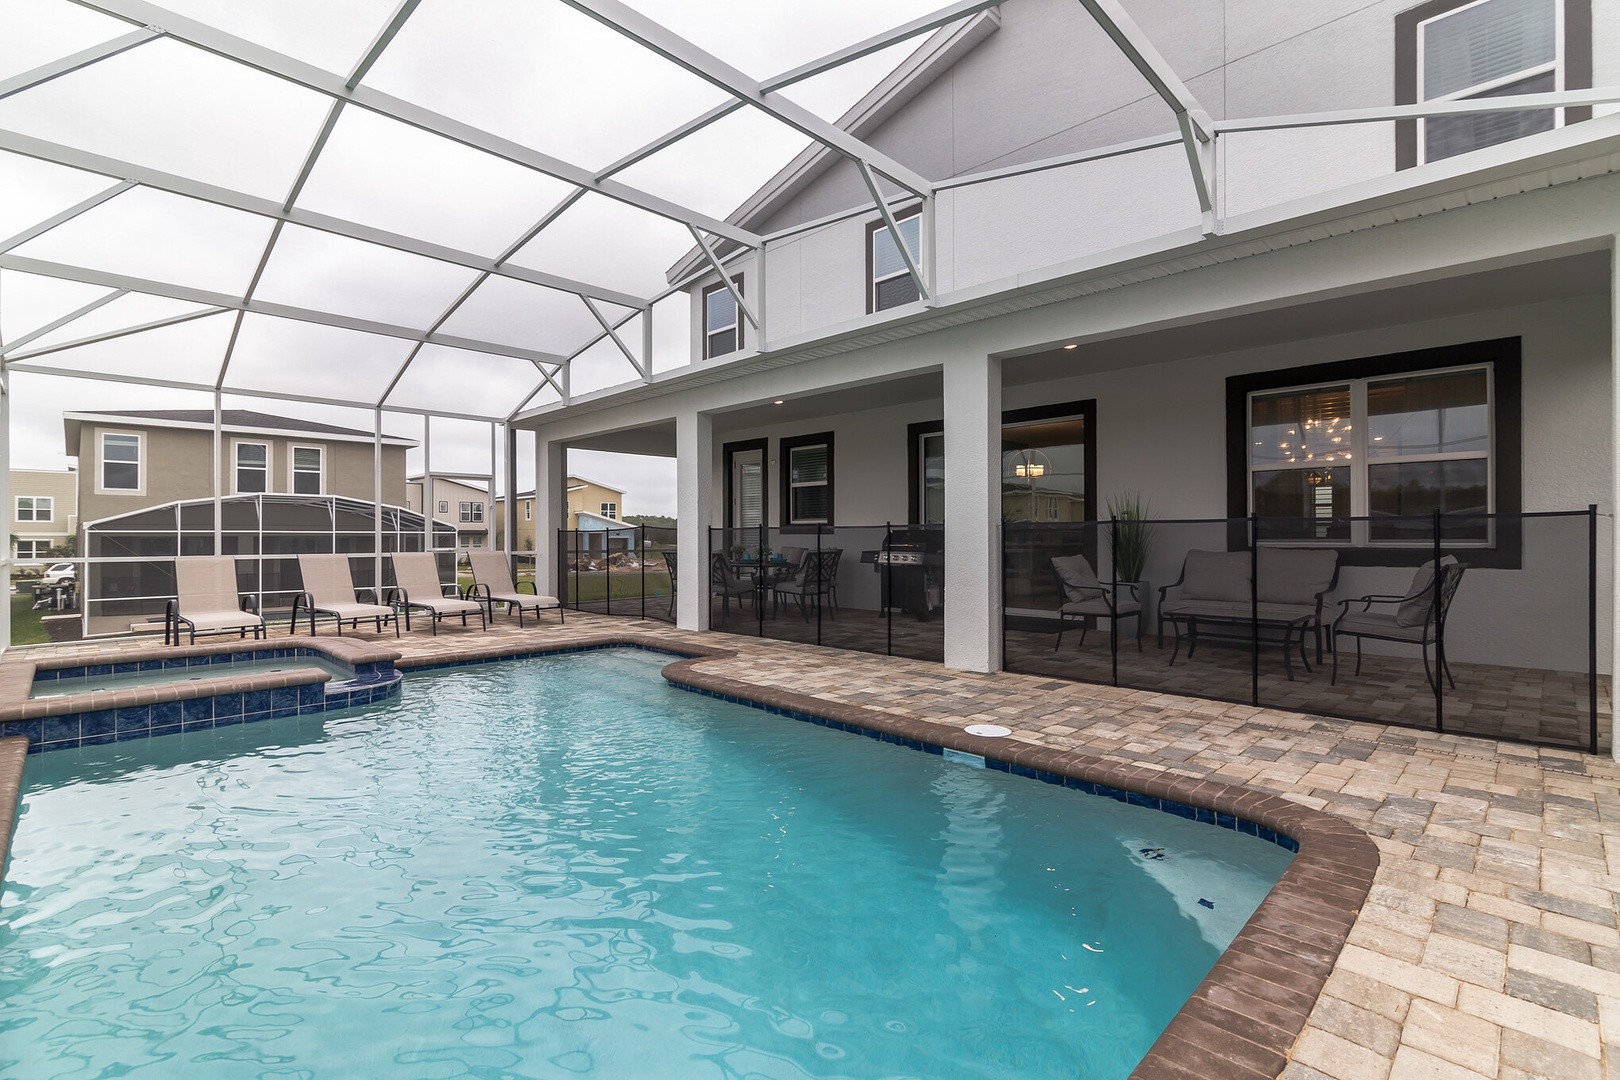 Private pool area, launge chairs and patio furniture